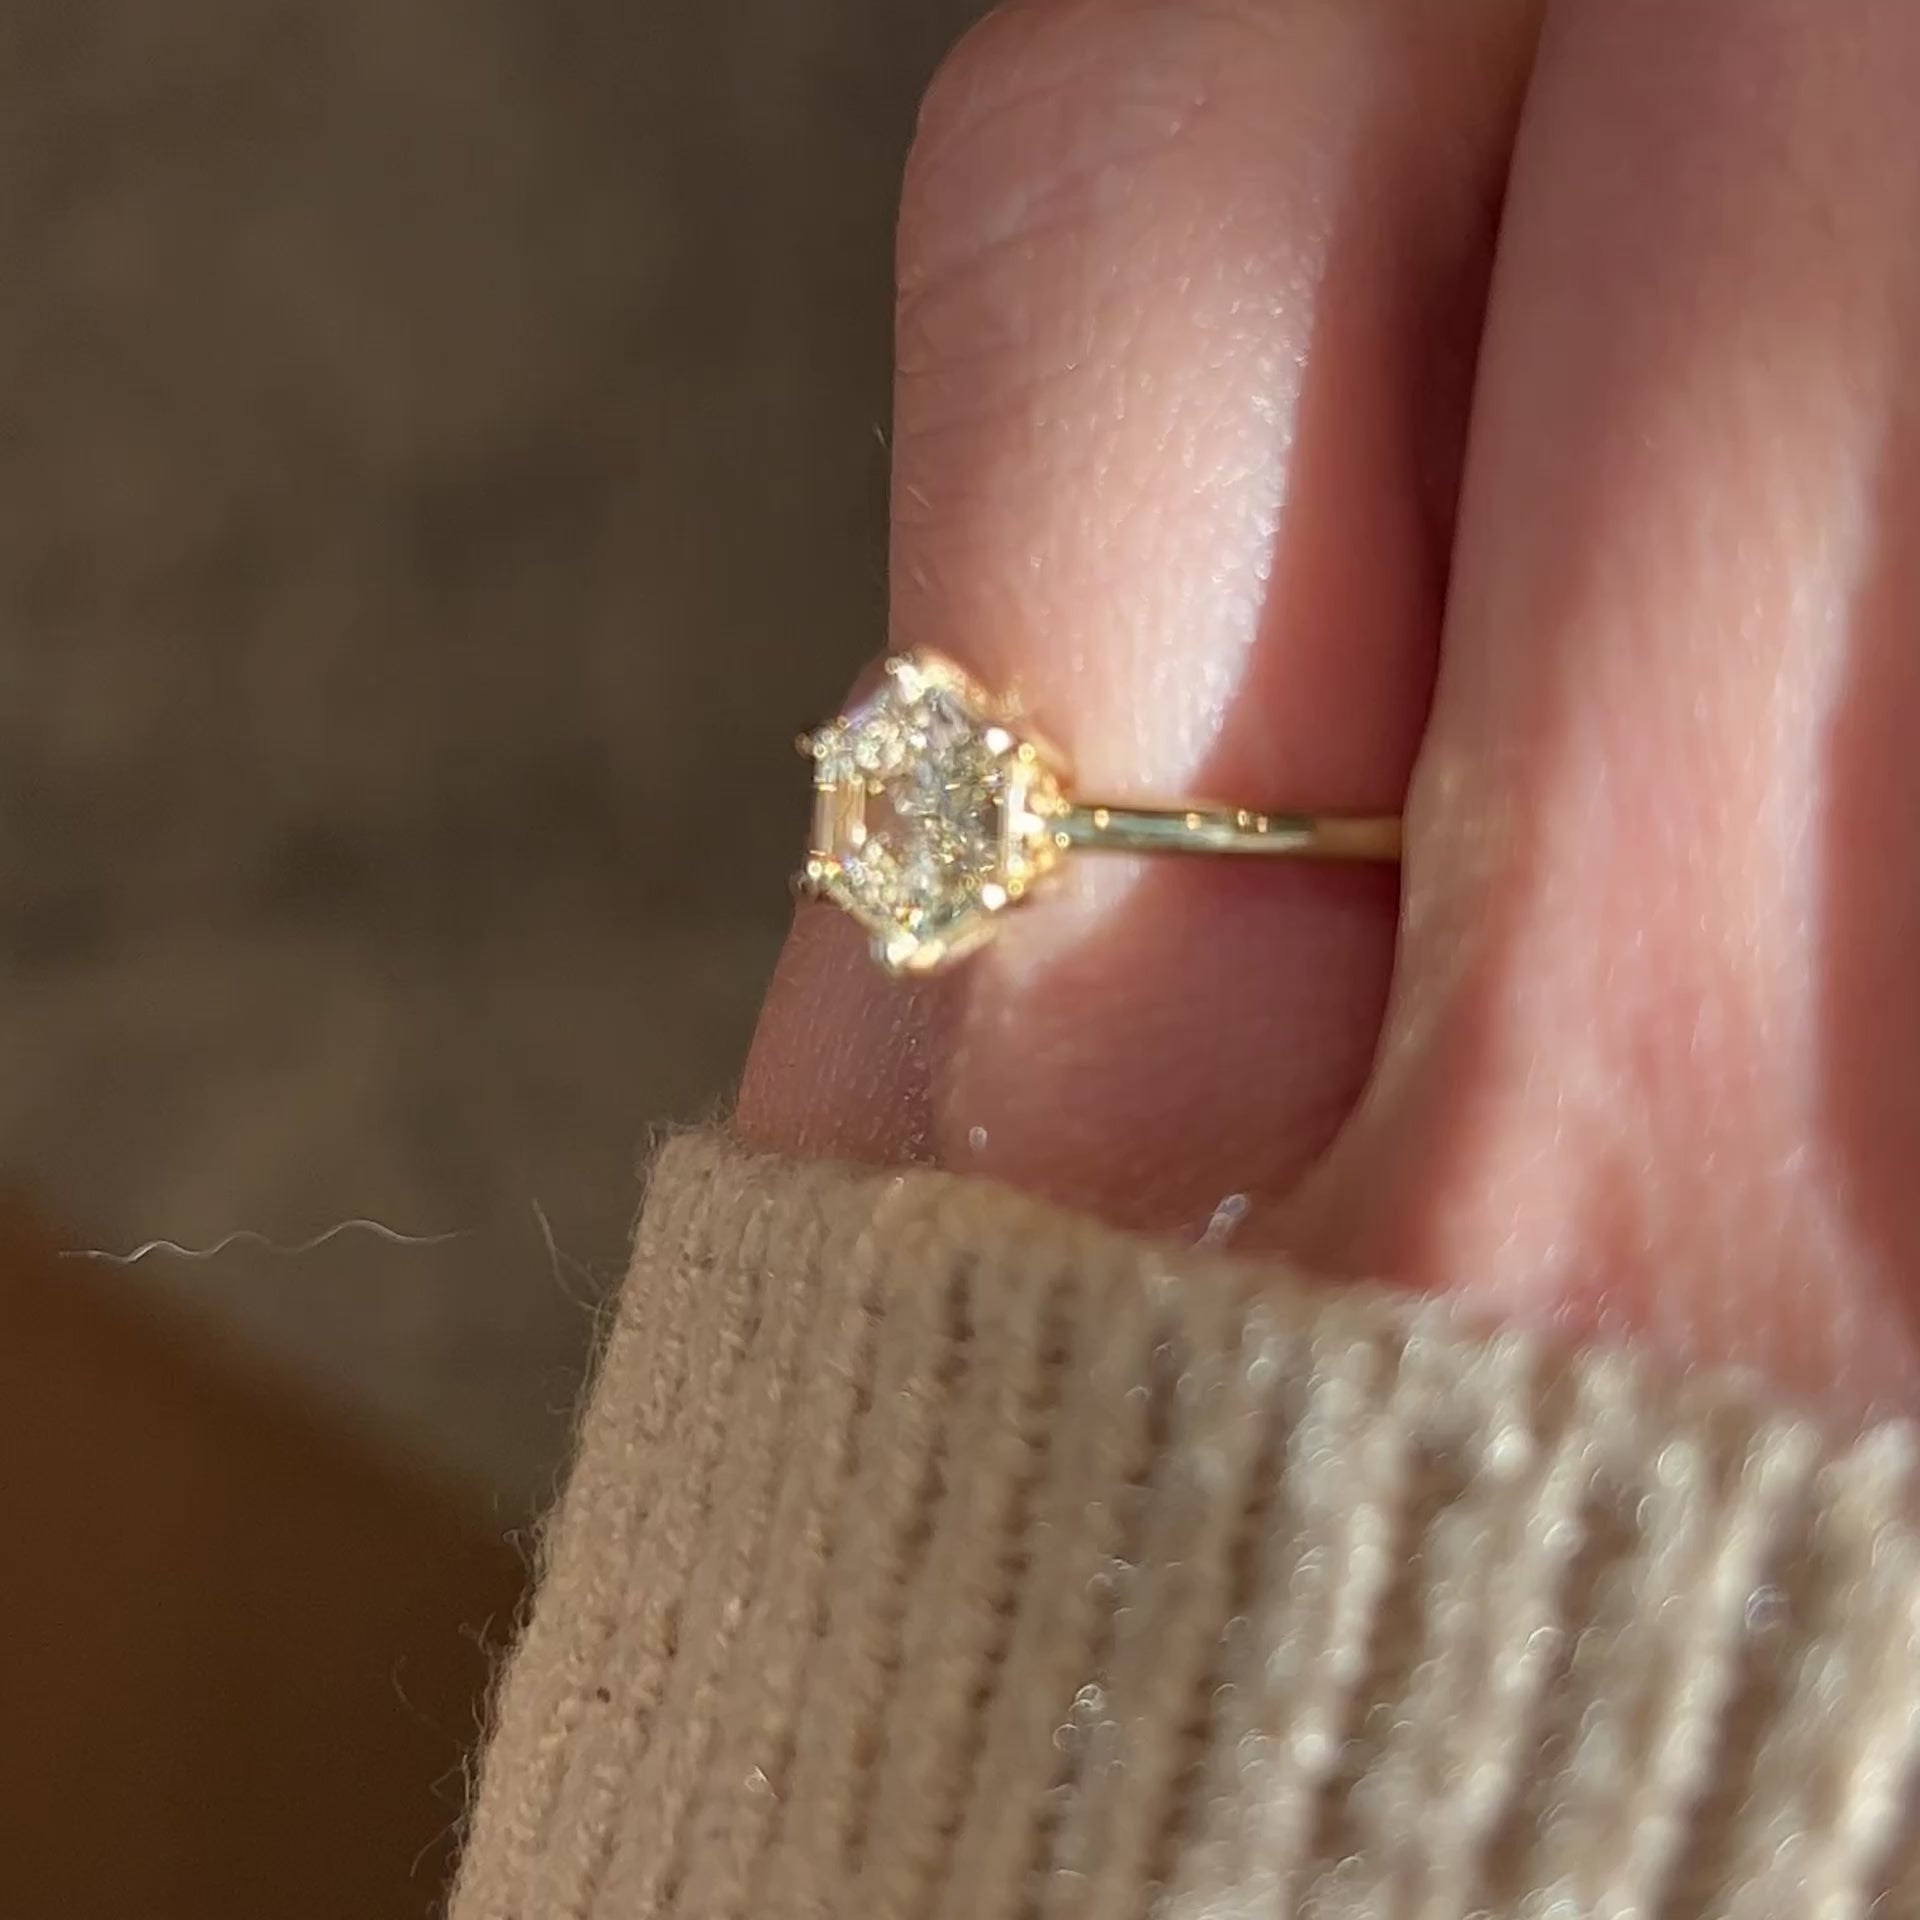 Video of hexagon diamond engagement ring in 14k yellow gold solitaire setting with six prongs on a hand